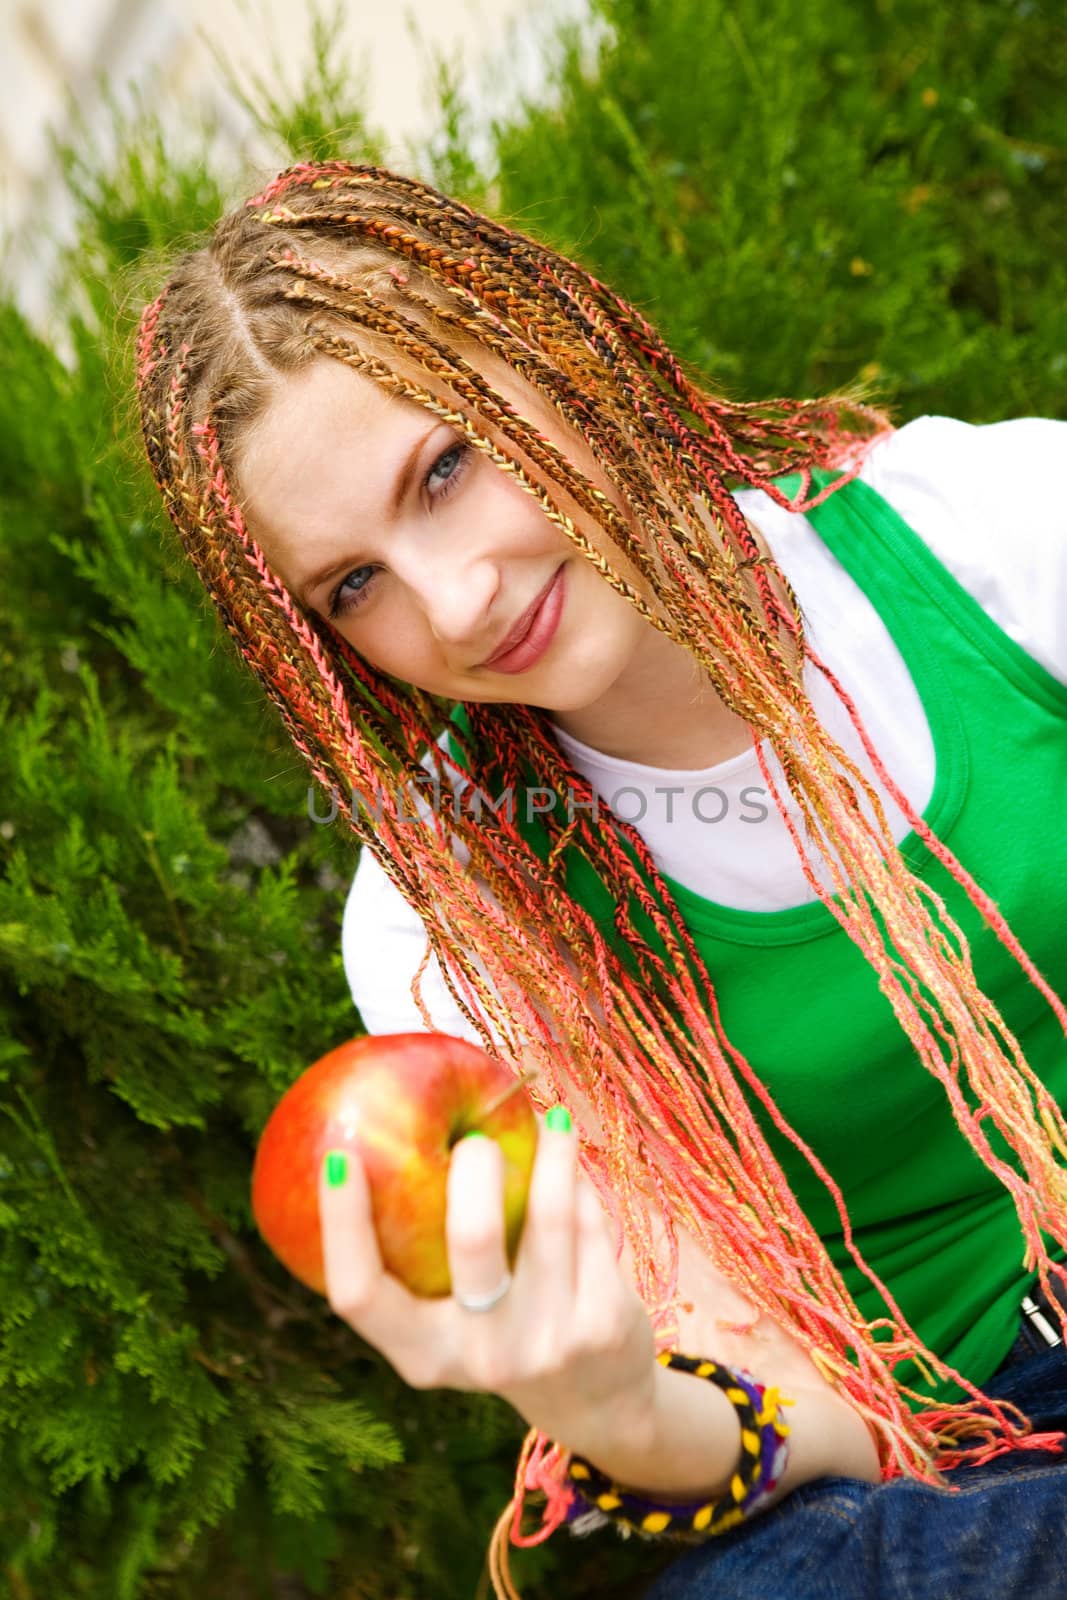 tennager girl with red apple on the green grass